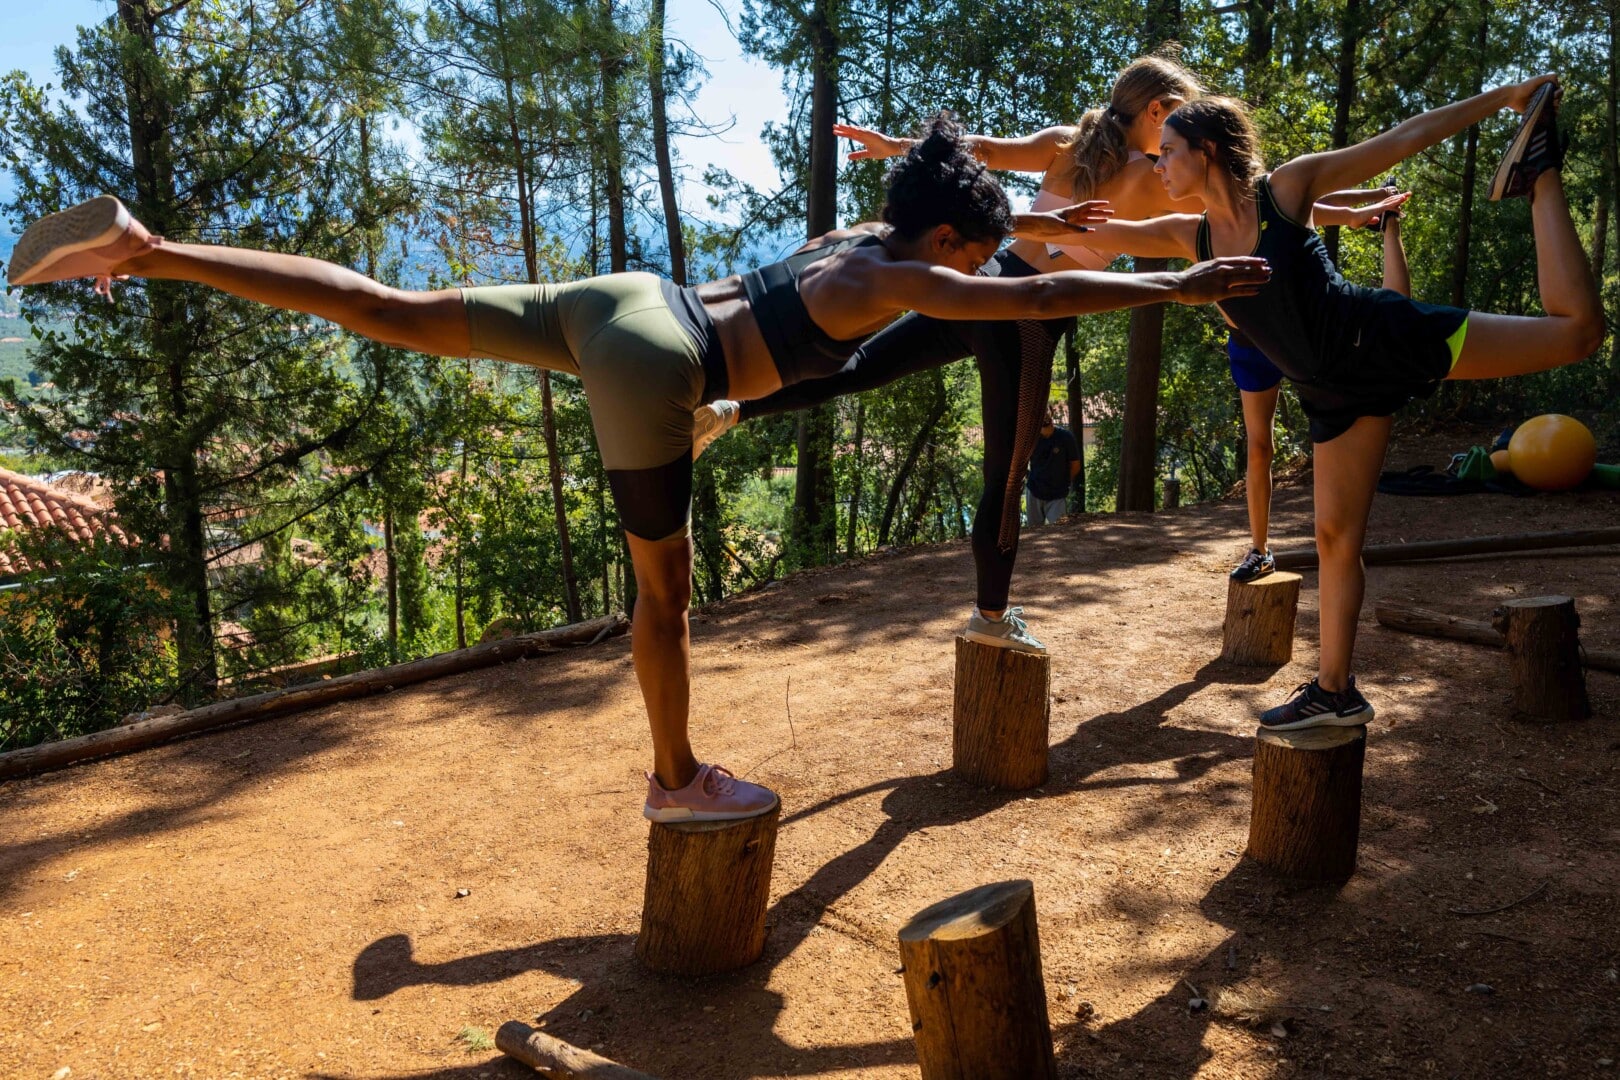 Practicing strength and balance is part of Euphoria’s fitness retreat that combines personal training and meal plans. 